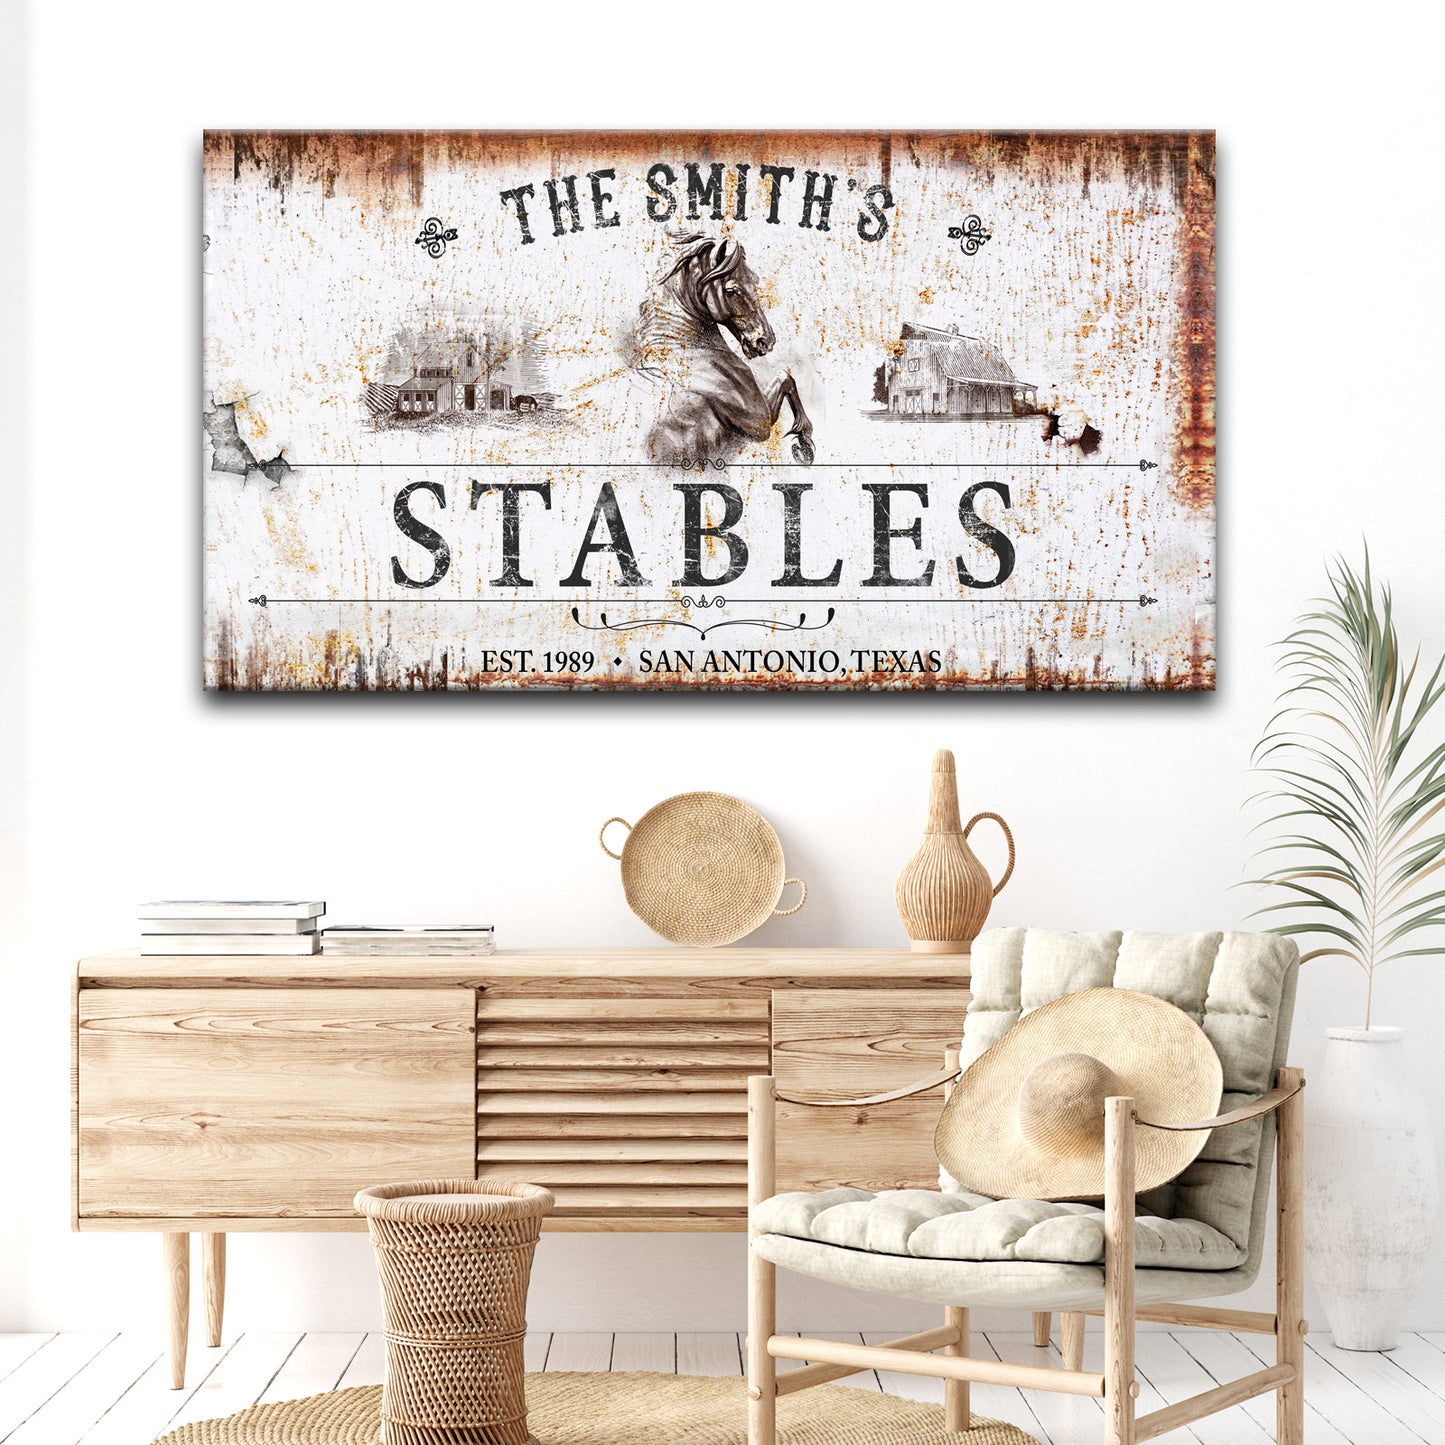 Rustic Stables Decor Sign - Image by Tailored Canvases